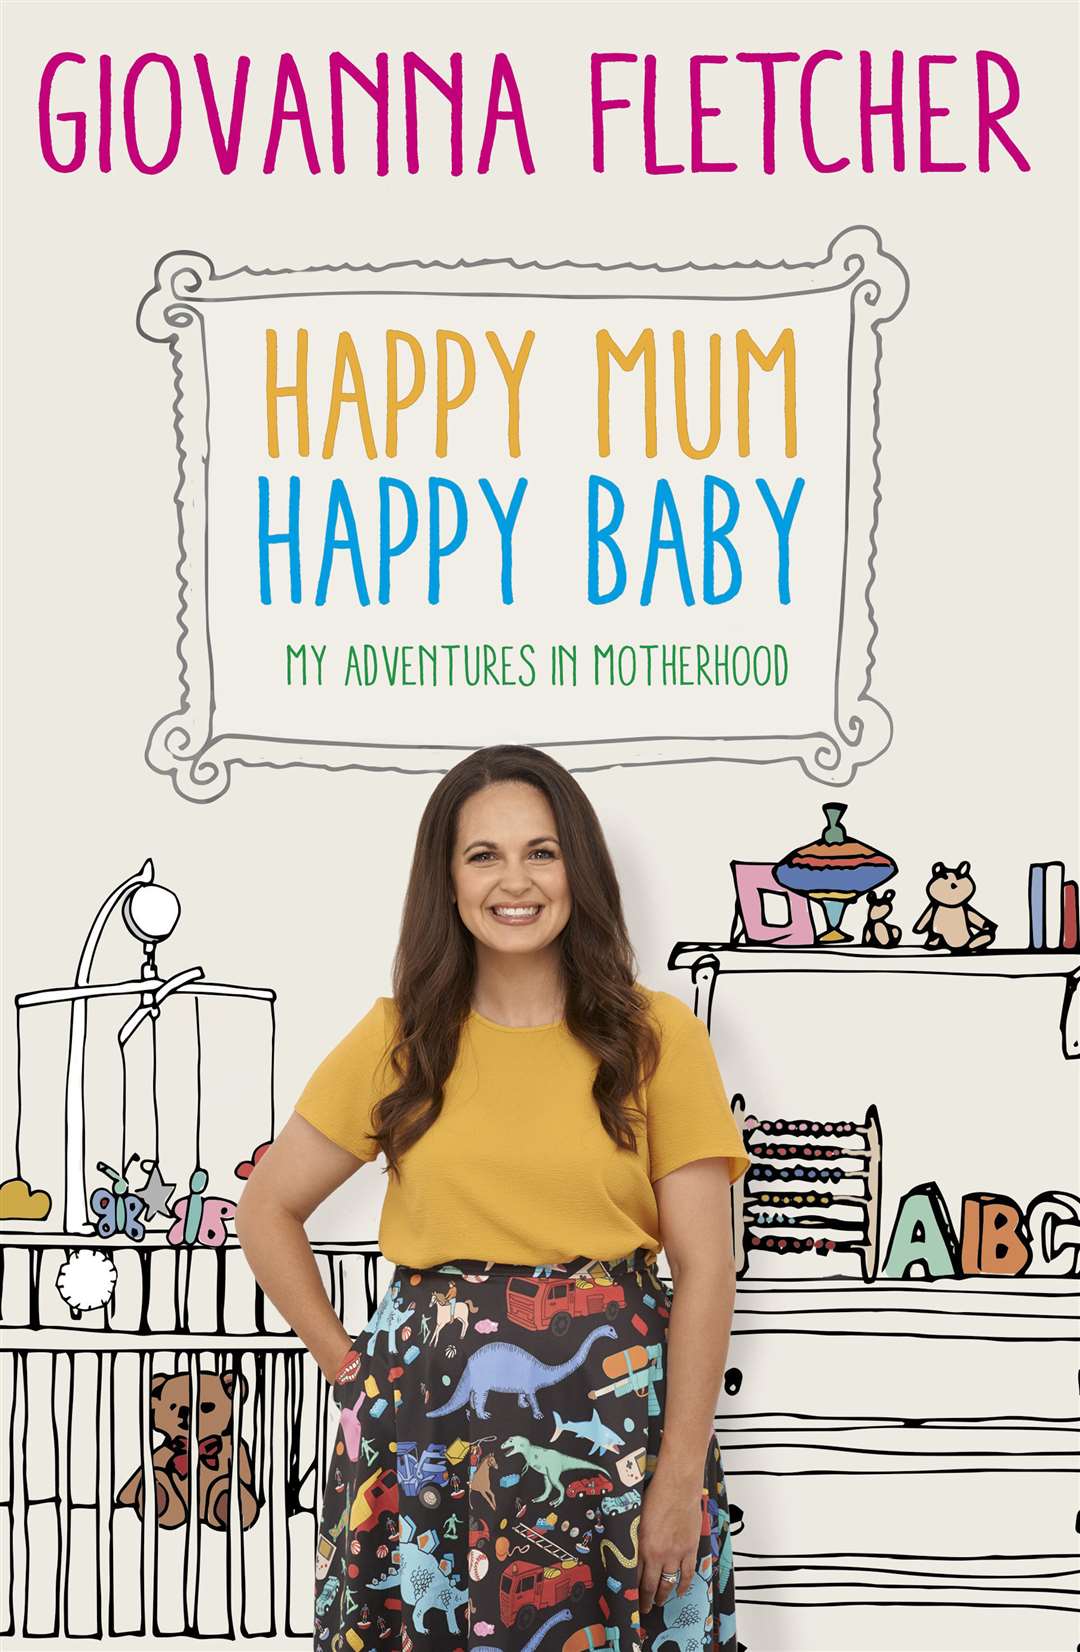 Happy Mum Happy Baby: My Adventures In Motherhood by Giovanna Fletcher is published by Coronet, priced £16.99